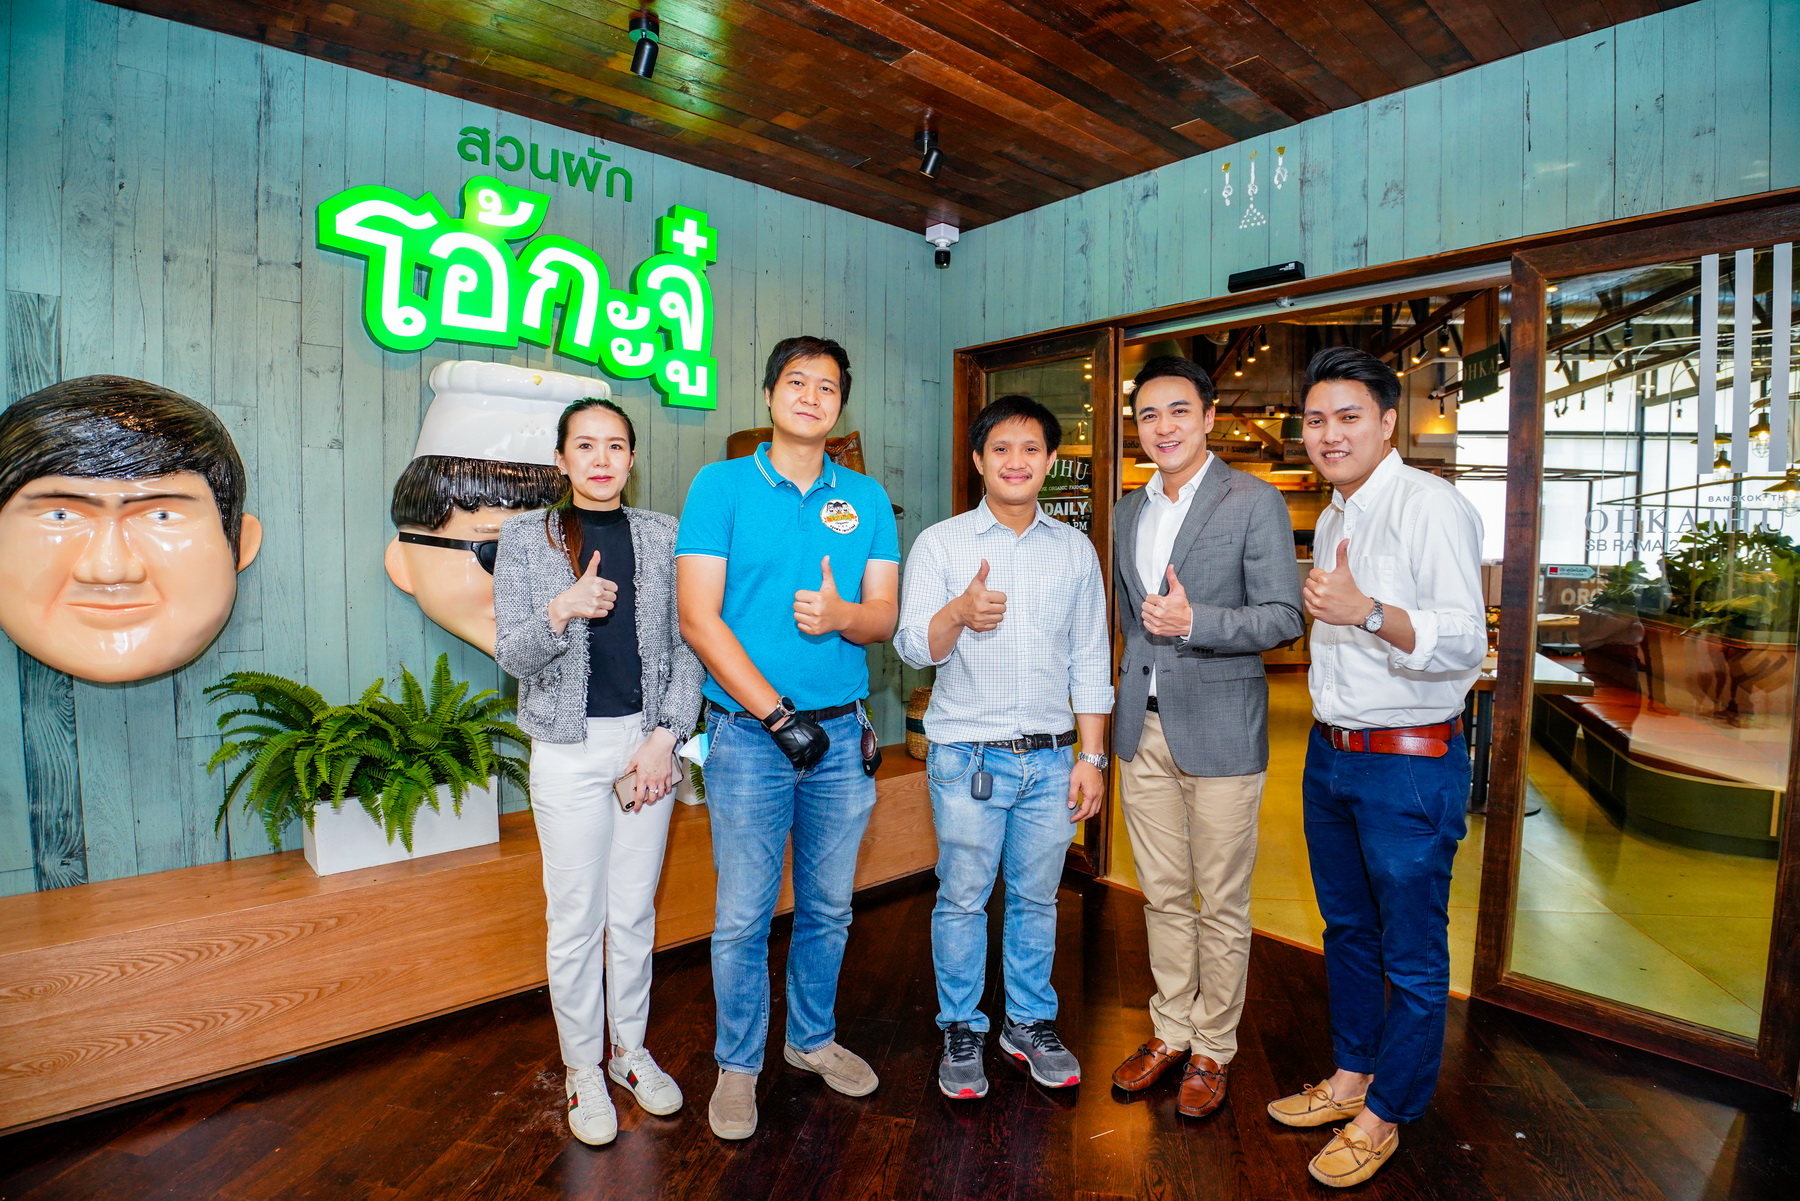 Photo Release: KTC jointly congratulates Ohkajhu for its grand opening of a new branch on Rama II, letting cardmembers dine deliciously with free strawberry yogurt